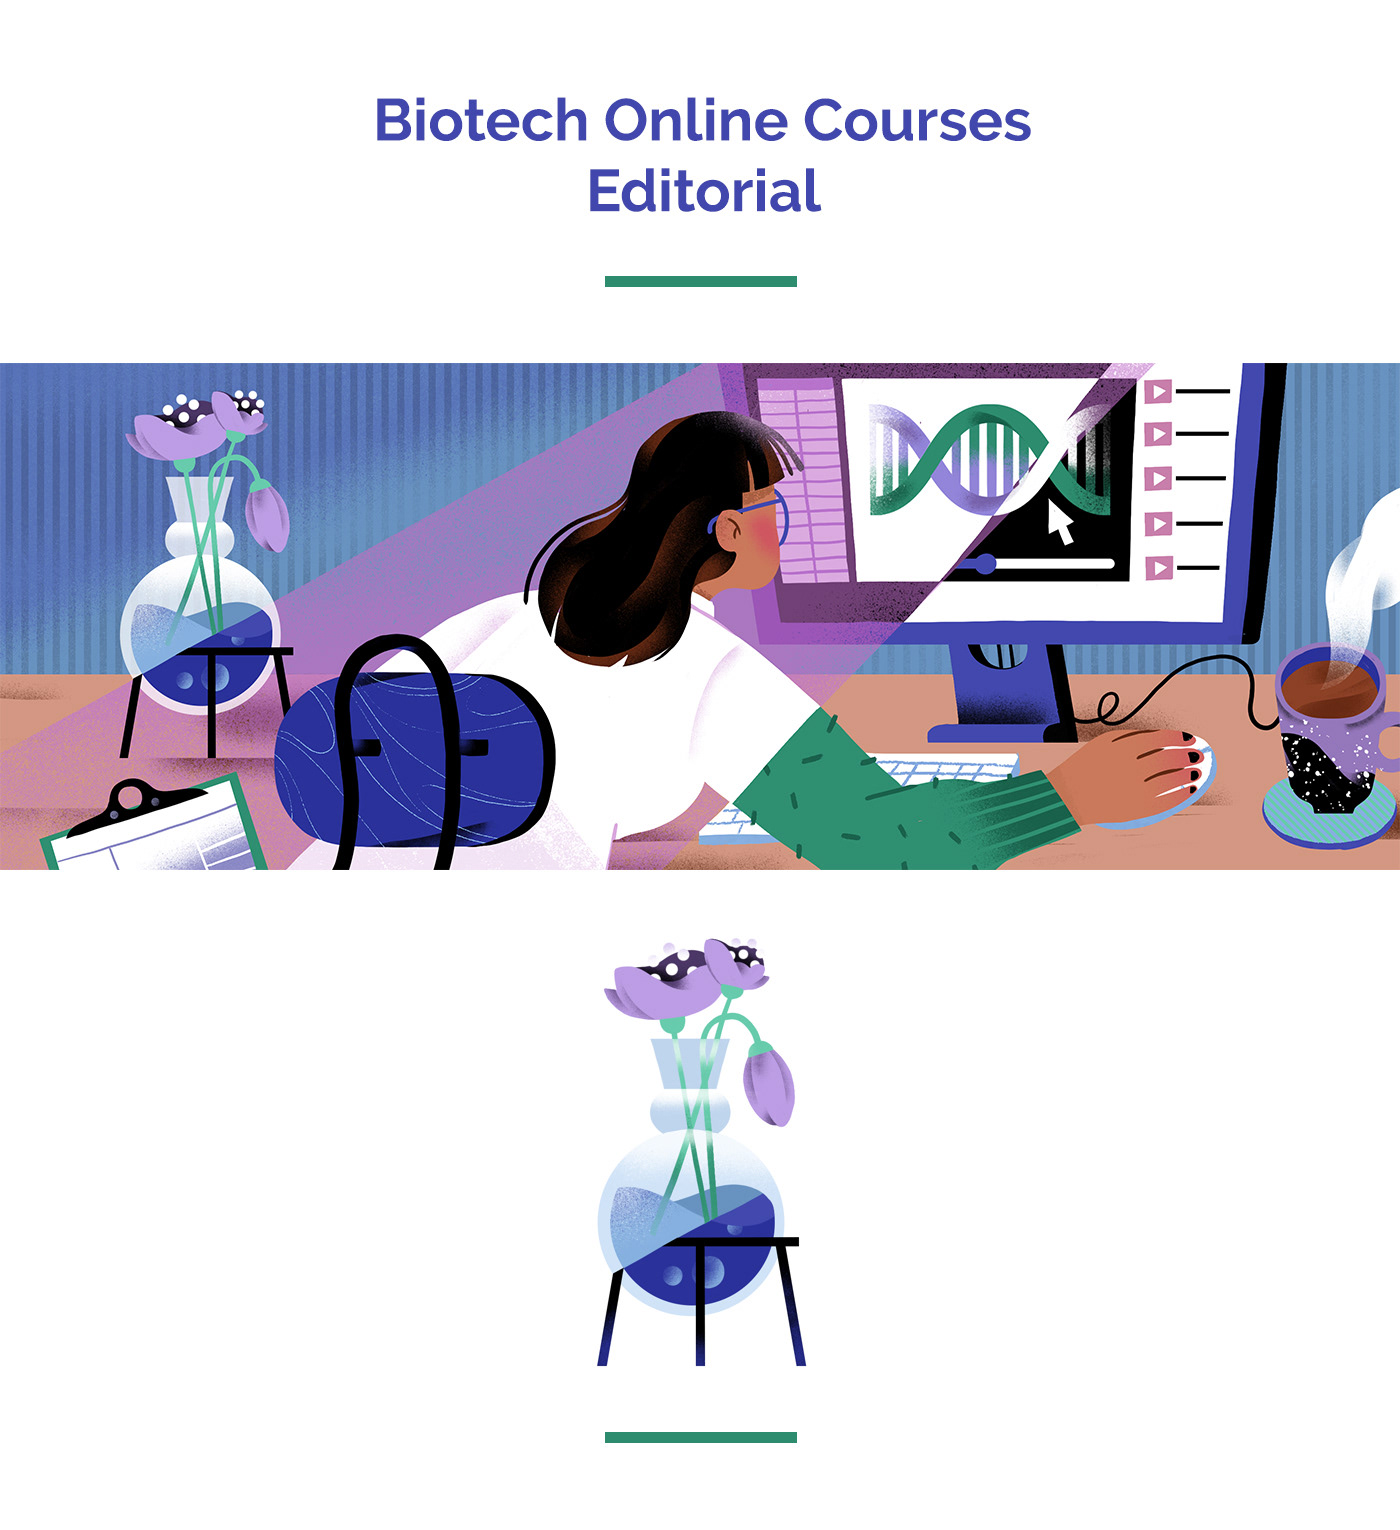 Biotech Online Courses on Behance